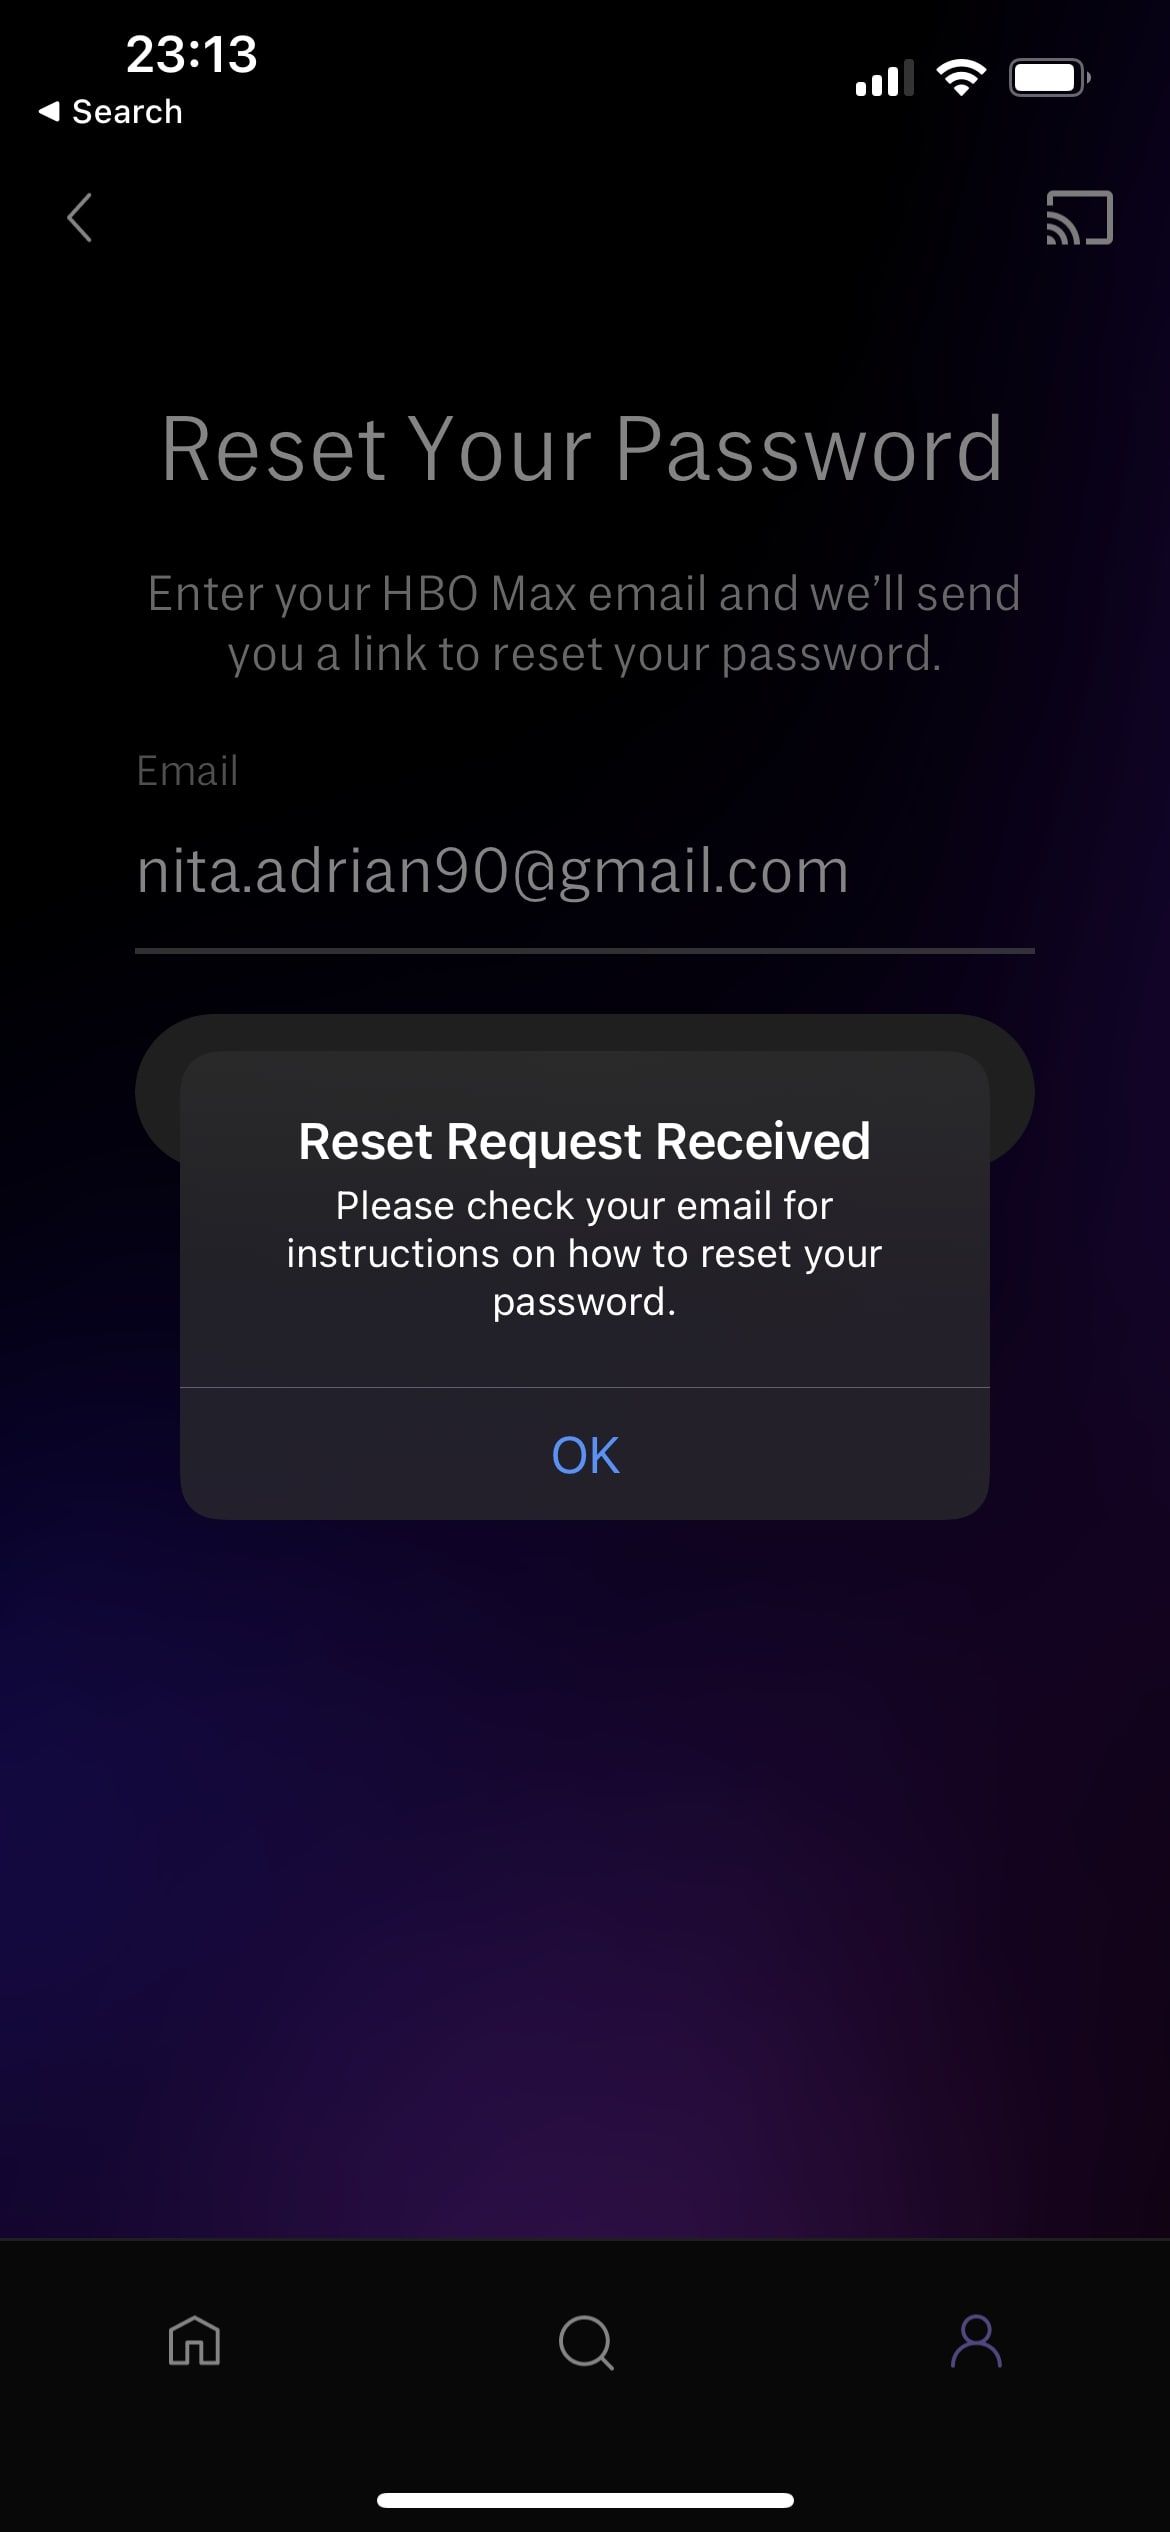 HBO Max app reset password confirmation